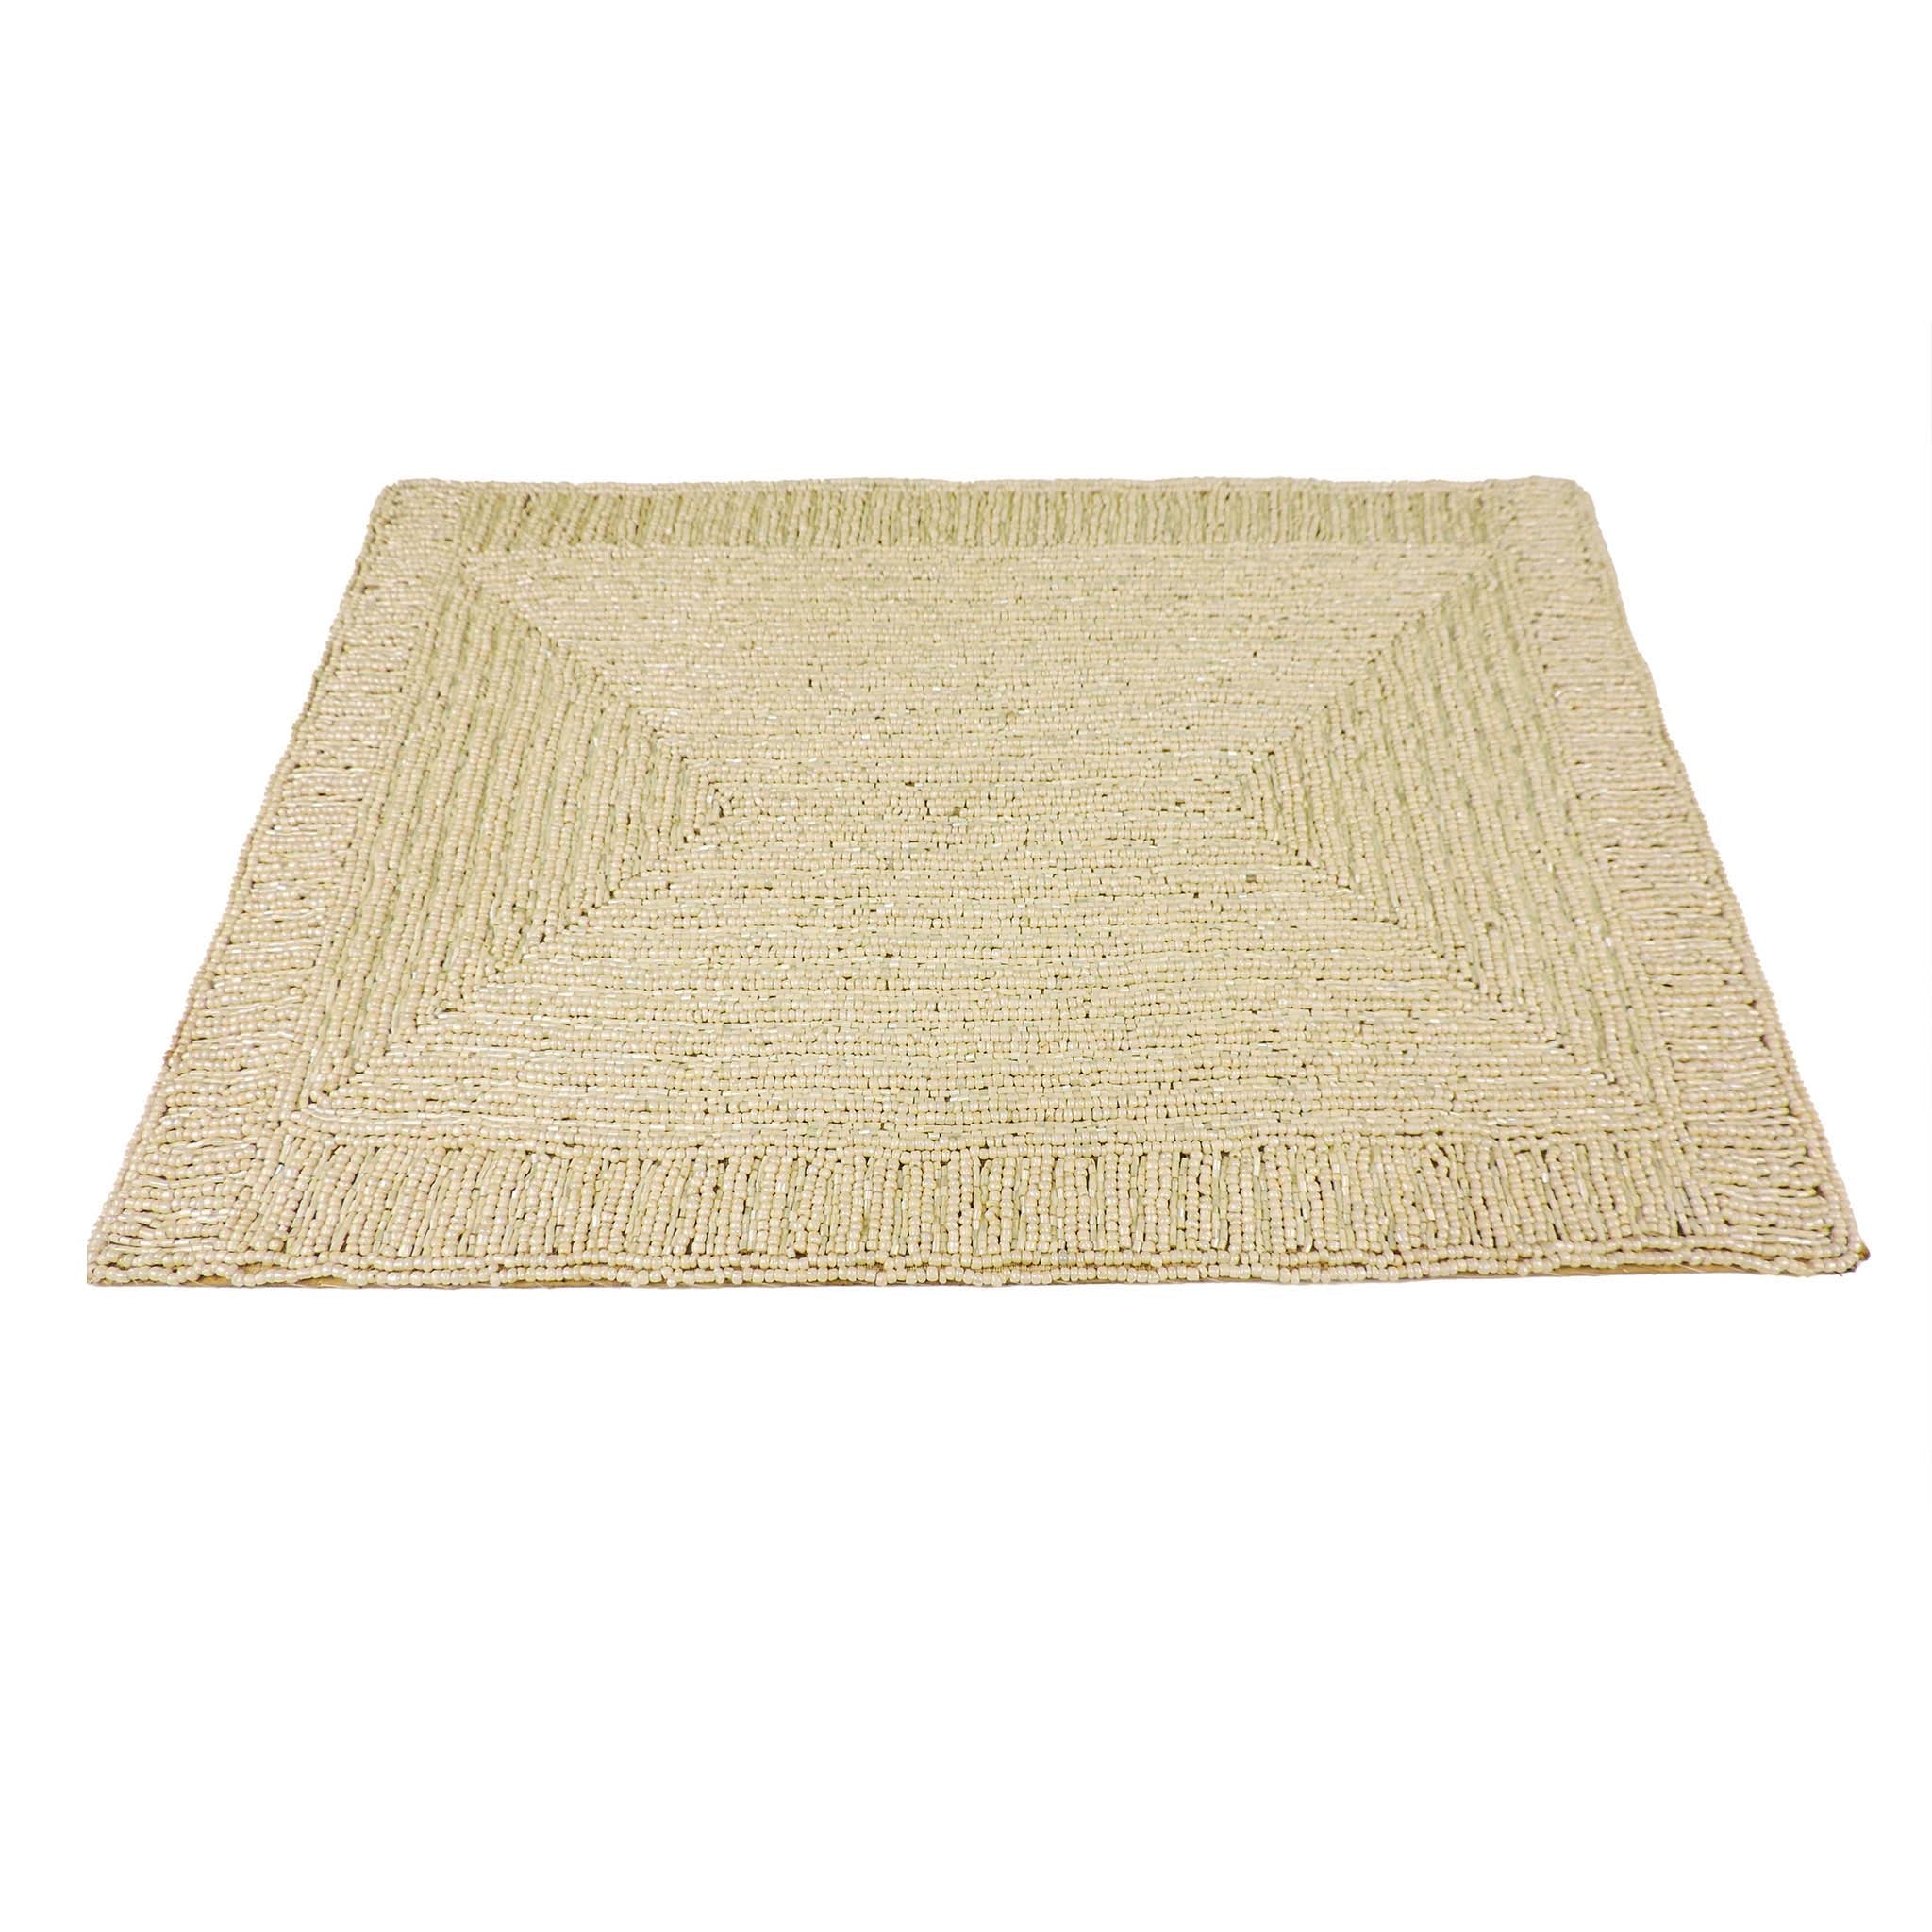 Glass Bead Embroidered Placemat<br>Color: Cream<br>Set of 2/4<br>Size: 12"x18"